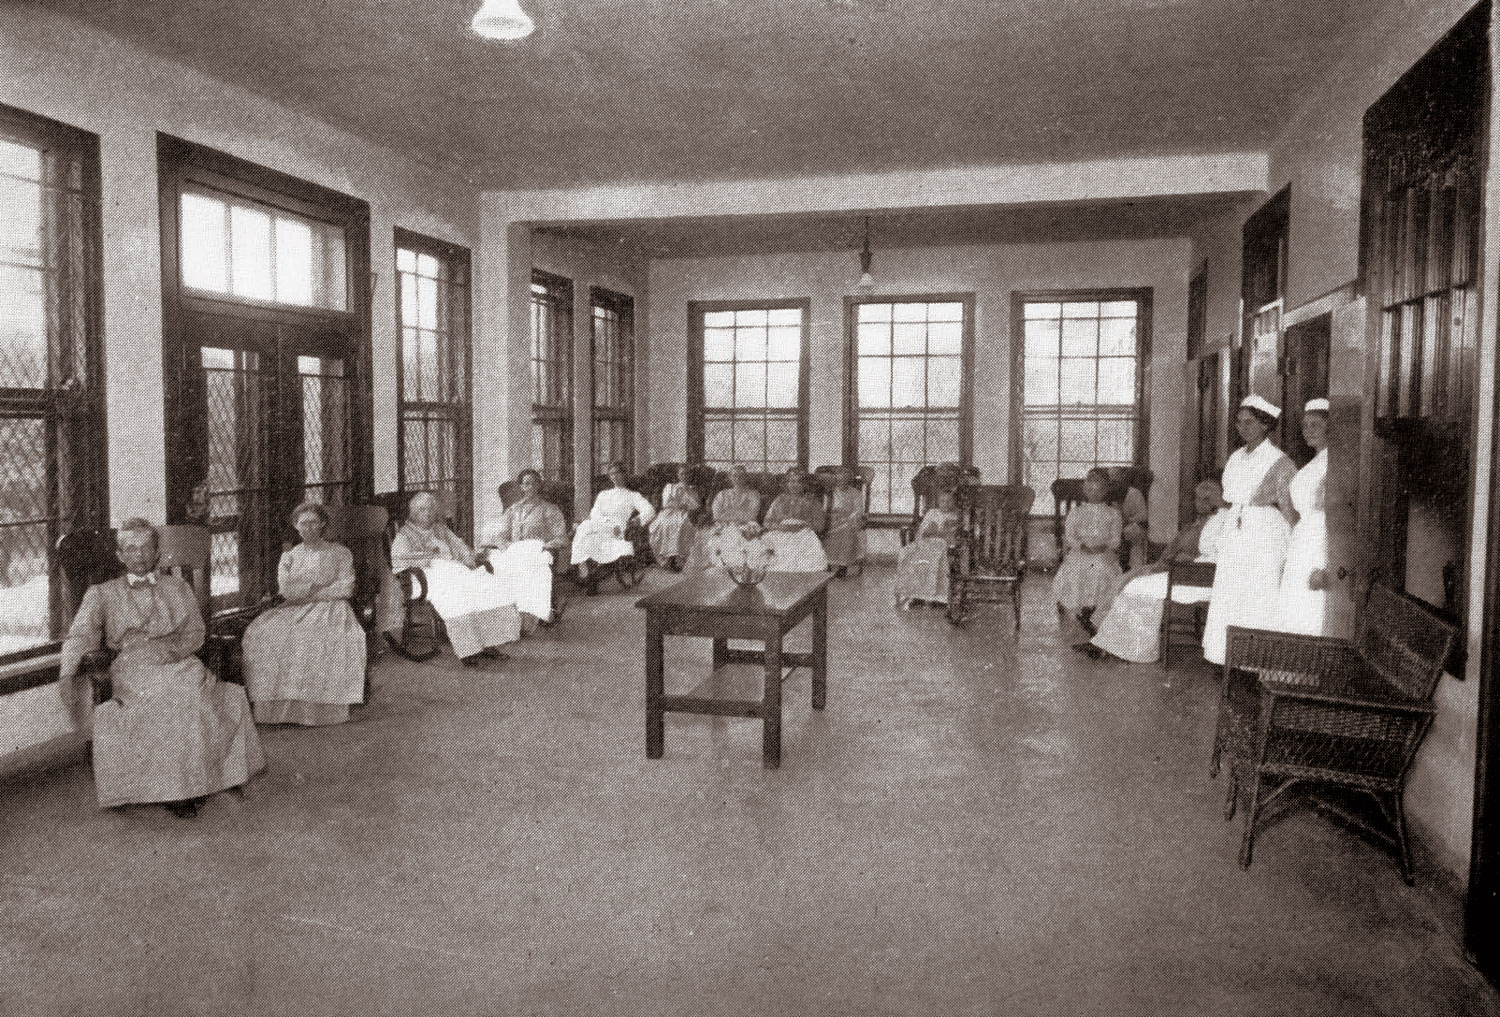 Rocking Chair Therapy taking place in a female ward at a hospital c. 1913 Missouri State archives